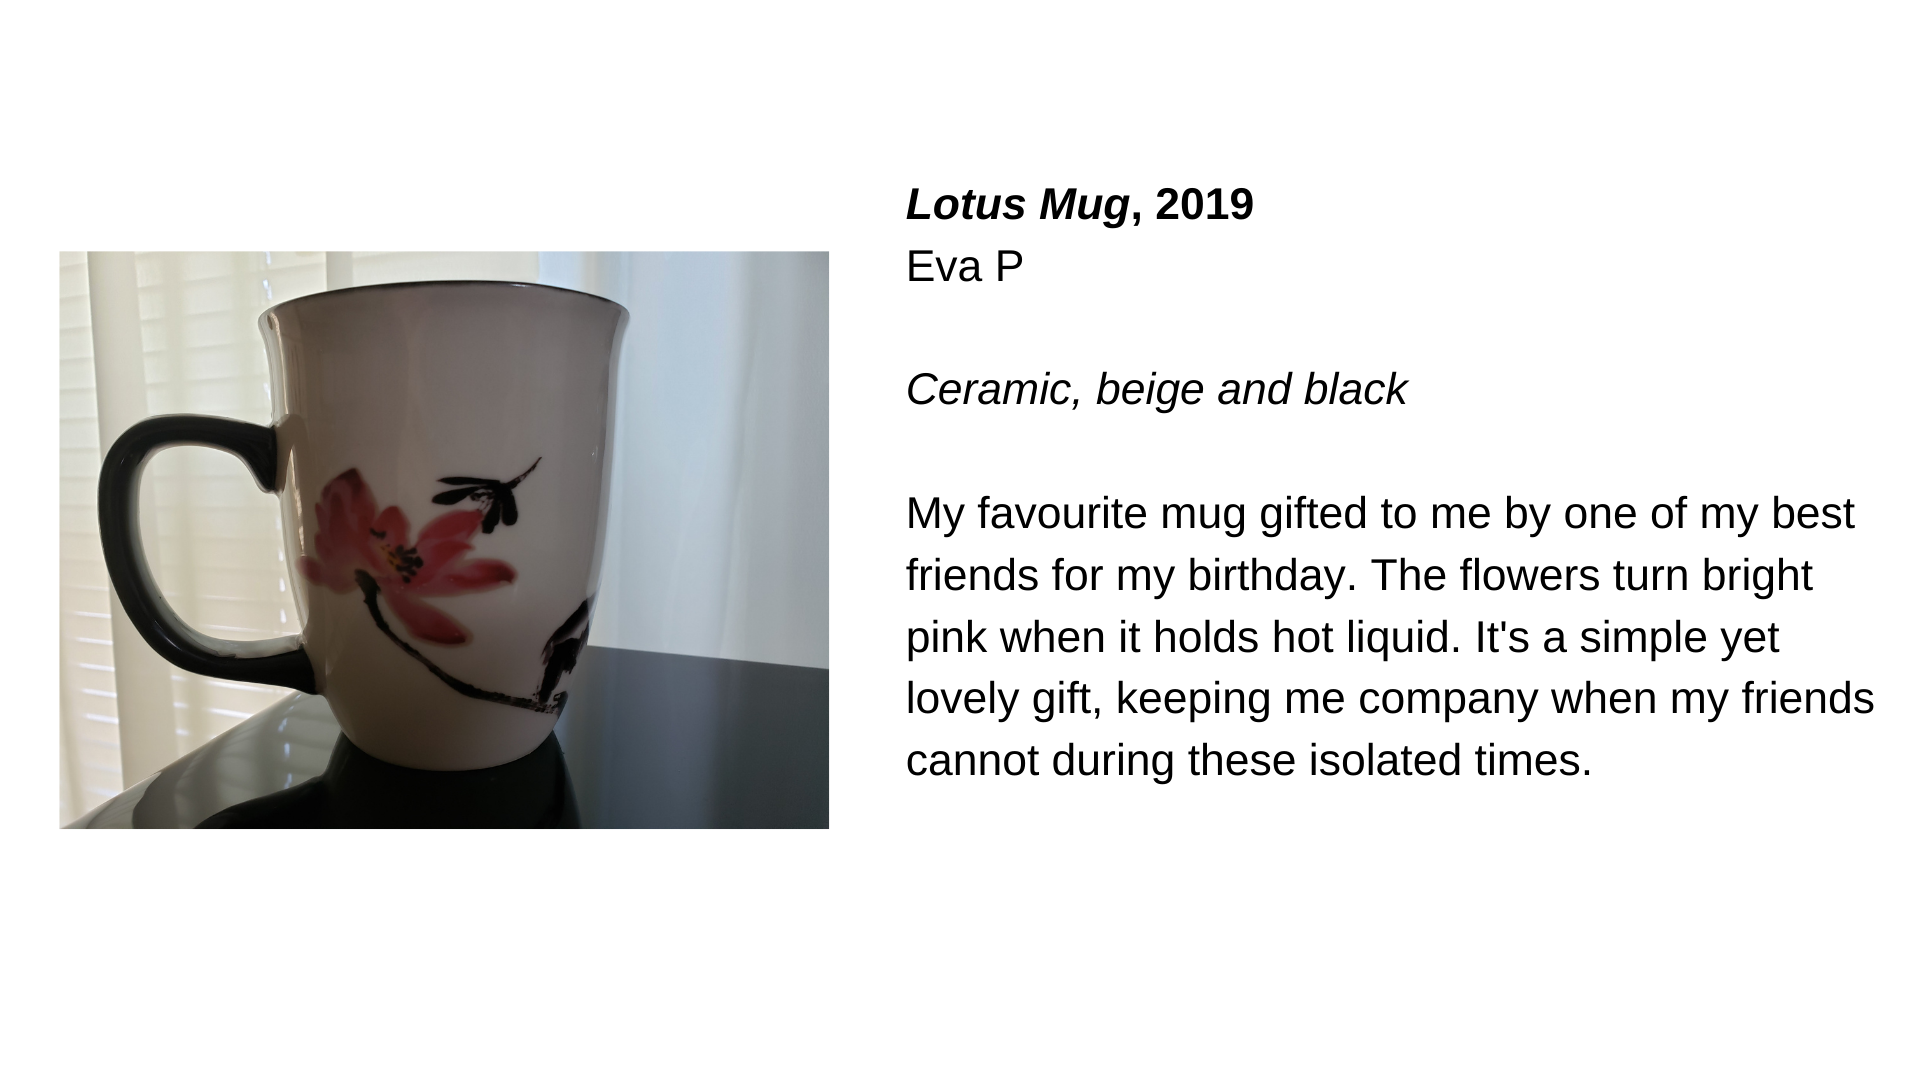  A mug with a flower painted on it. Next to this image, the text “Lotus Mug, 2019 - Eva P. Ceramic, beige and black. My favourite mug gifted to me by one of my best friends for my birthday. The flowers turn bright pink when it holds hot liquid. It's 